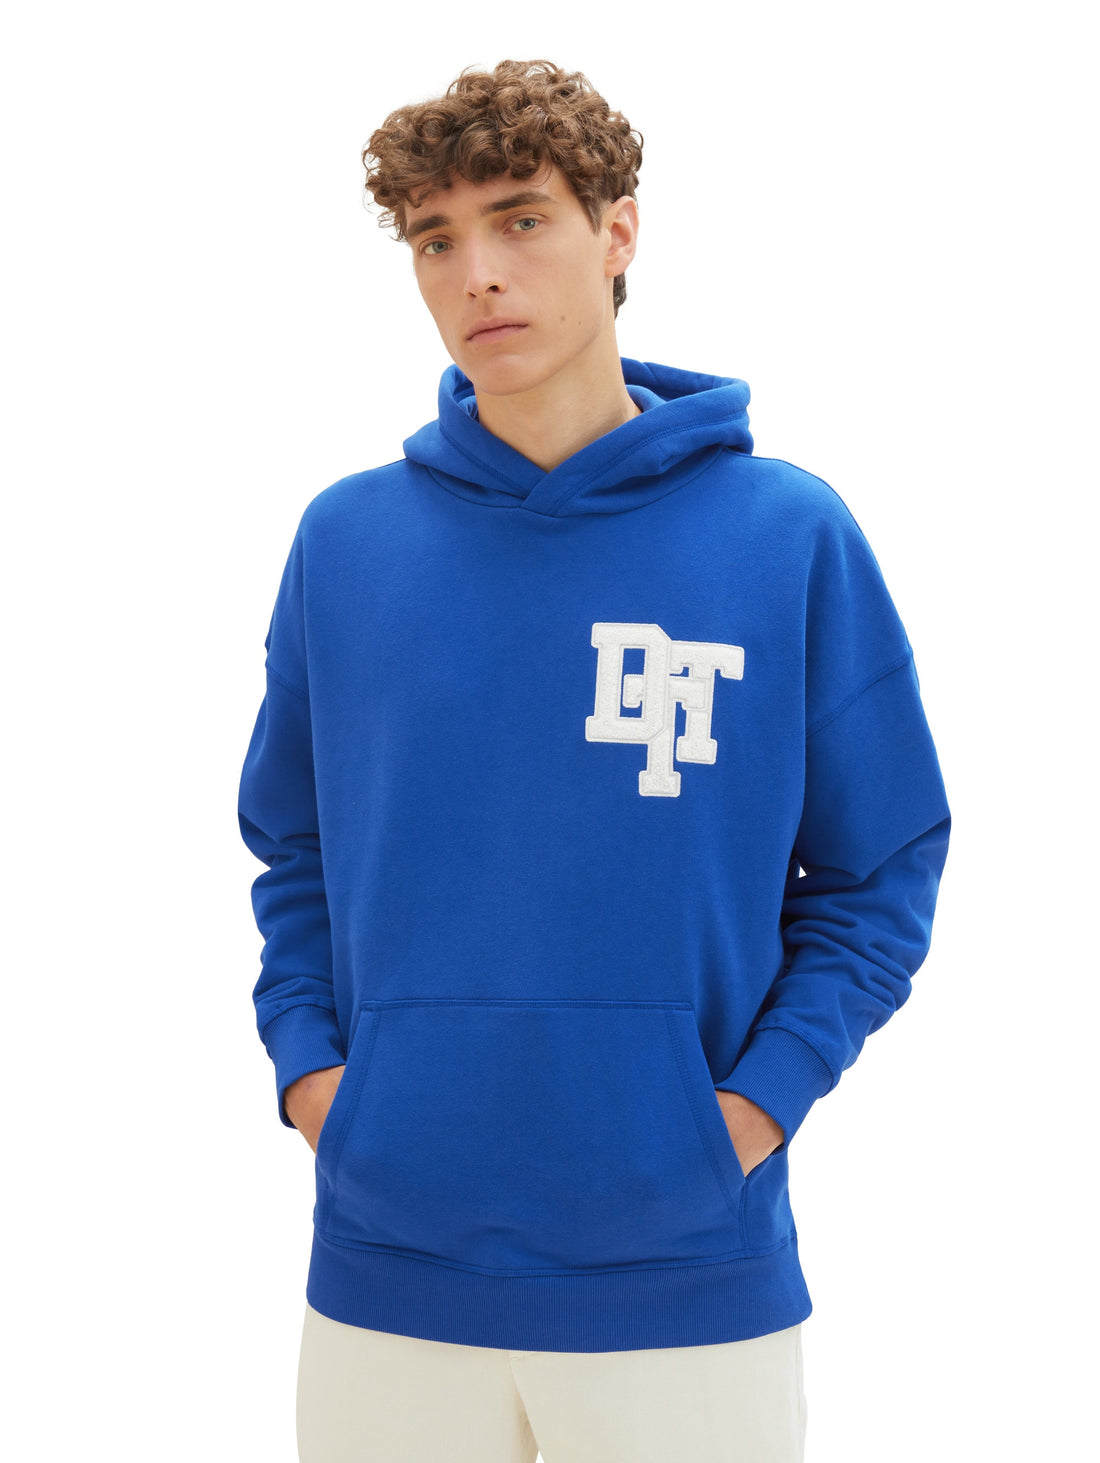 Oversized College Hoodie_1037603_14531_06